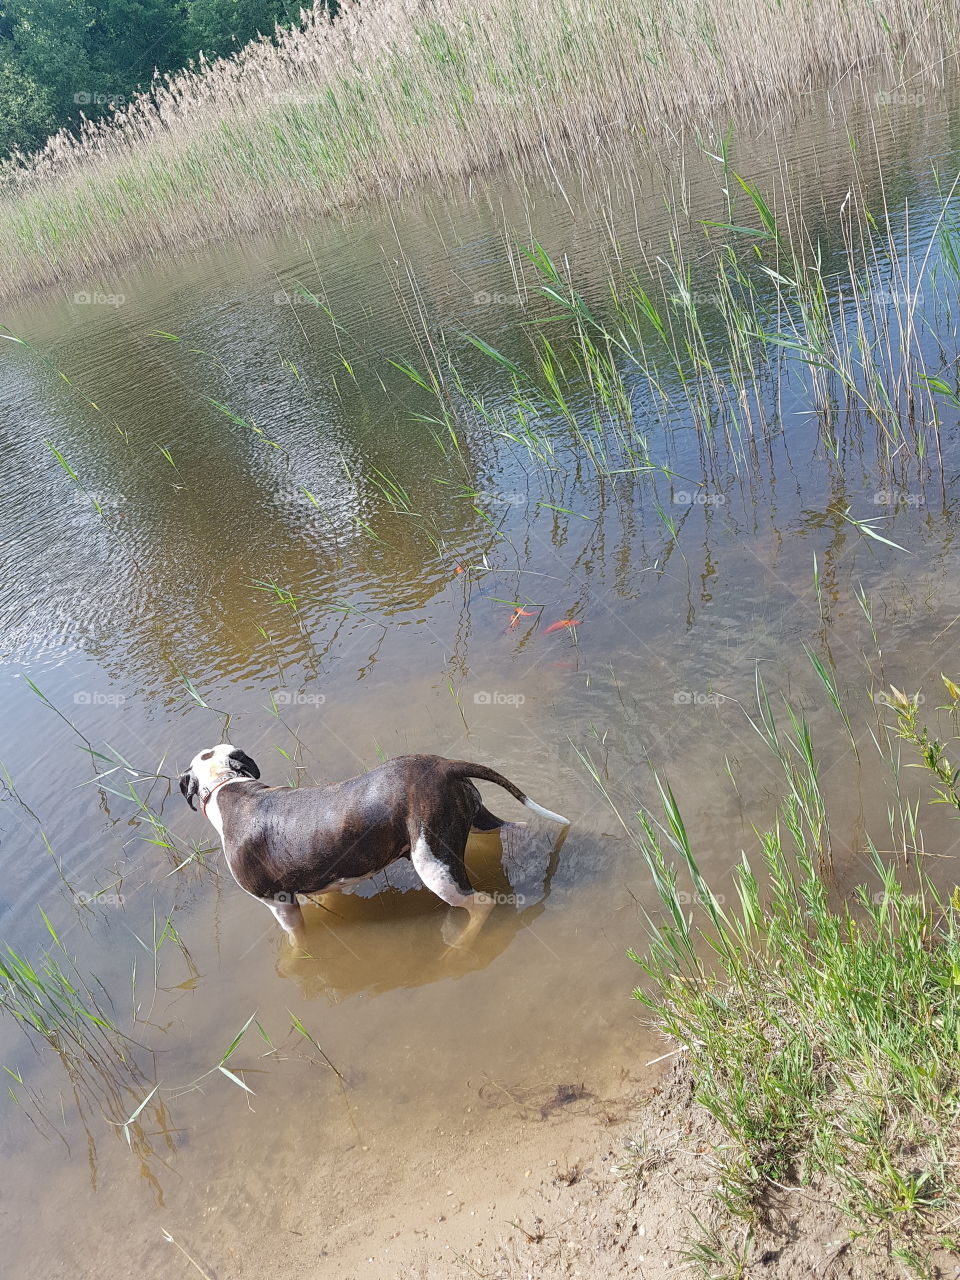 Dog wadeing into the water during a sweltering morning walk.